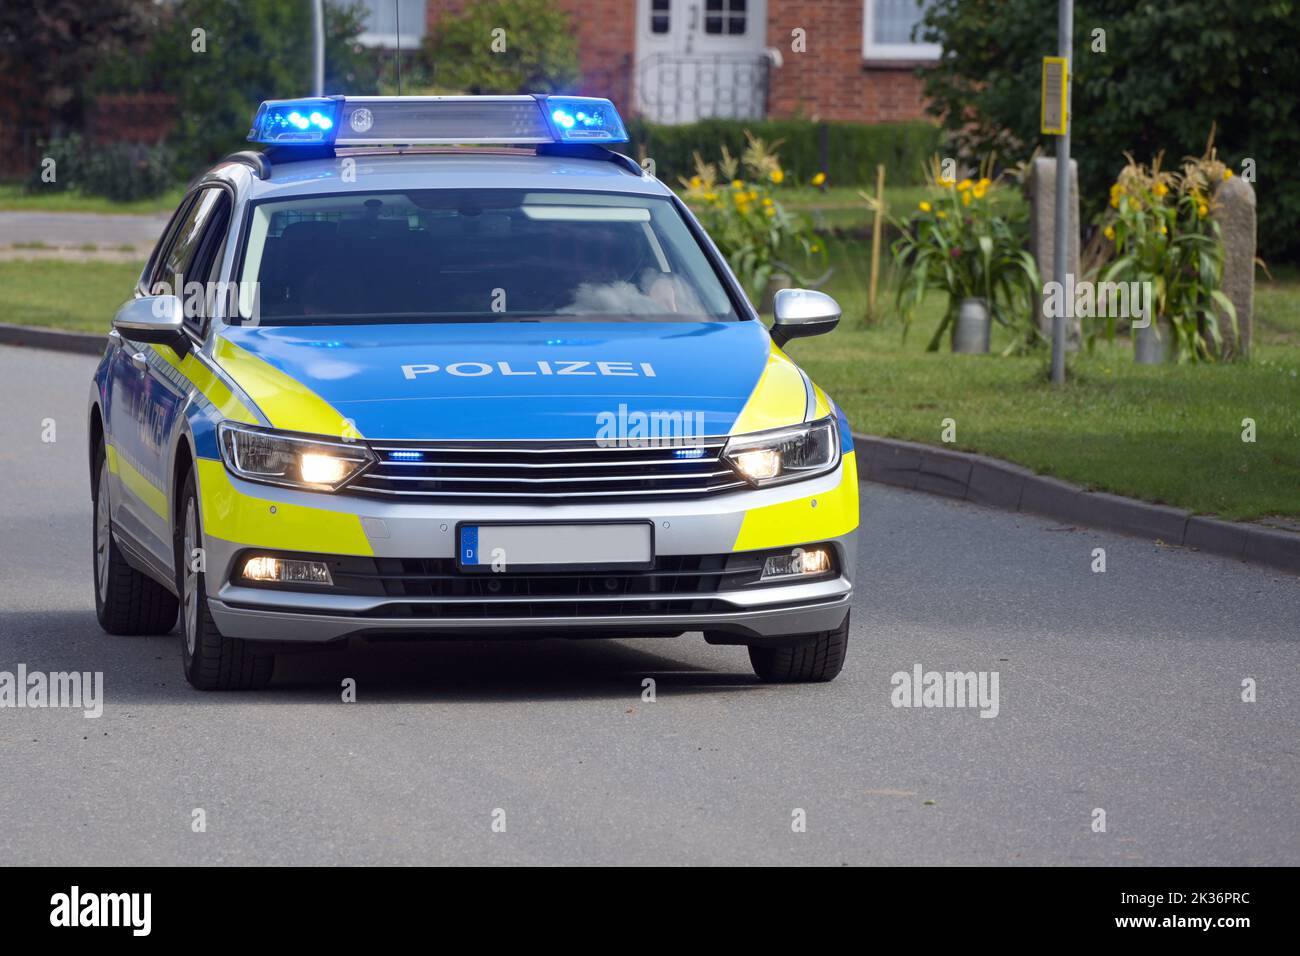 German police car on duty driving with flashing blue lights on through a rural suburb, inscription Polizei means police, copy space, selected focus Stock Photo